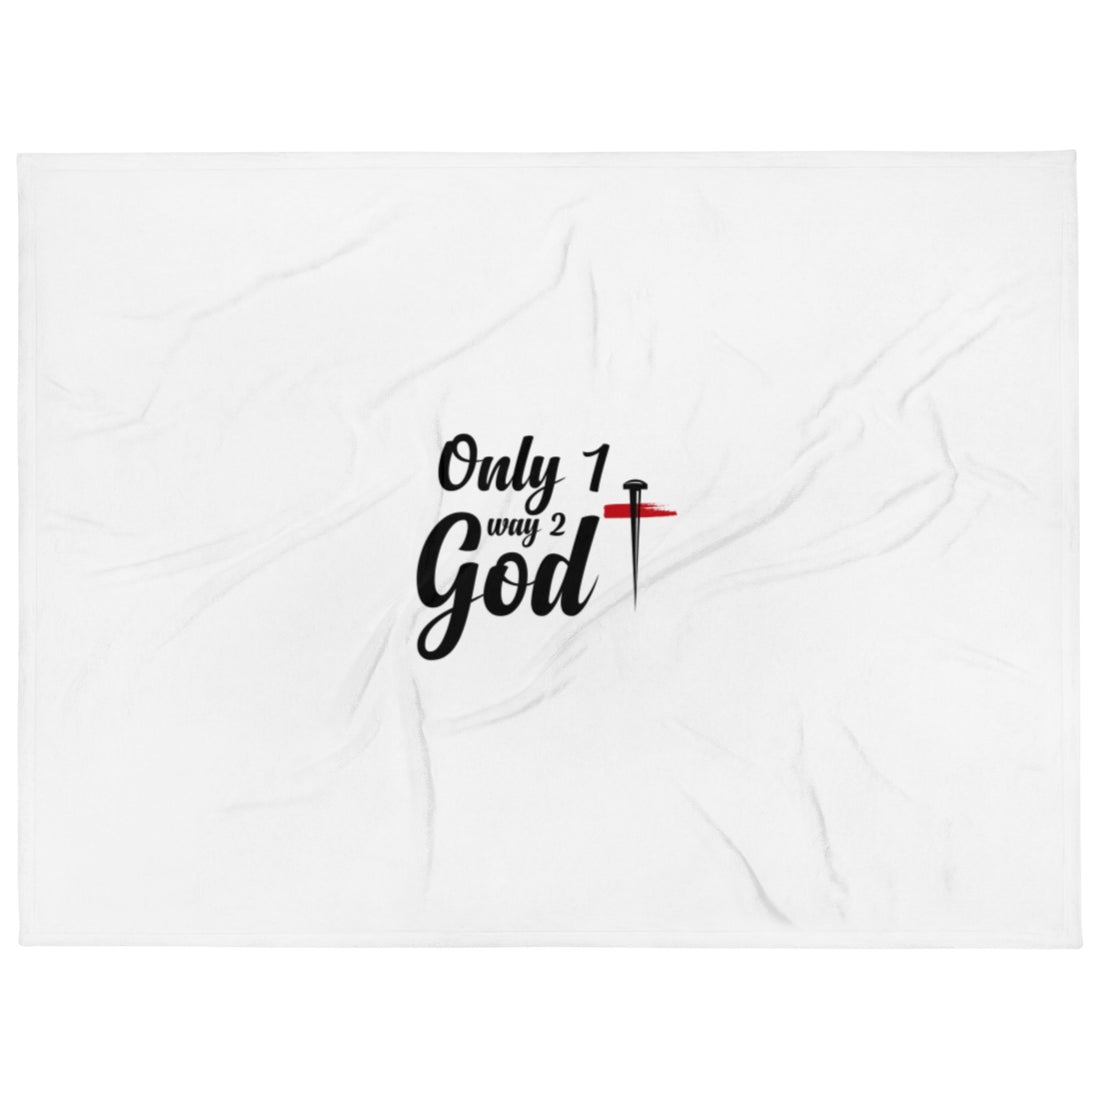 ONLY 1 WAY 2 GOD THROW BLANKET